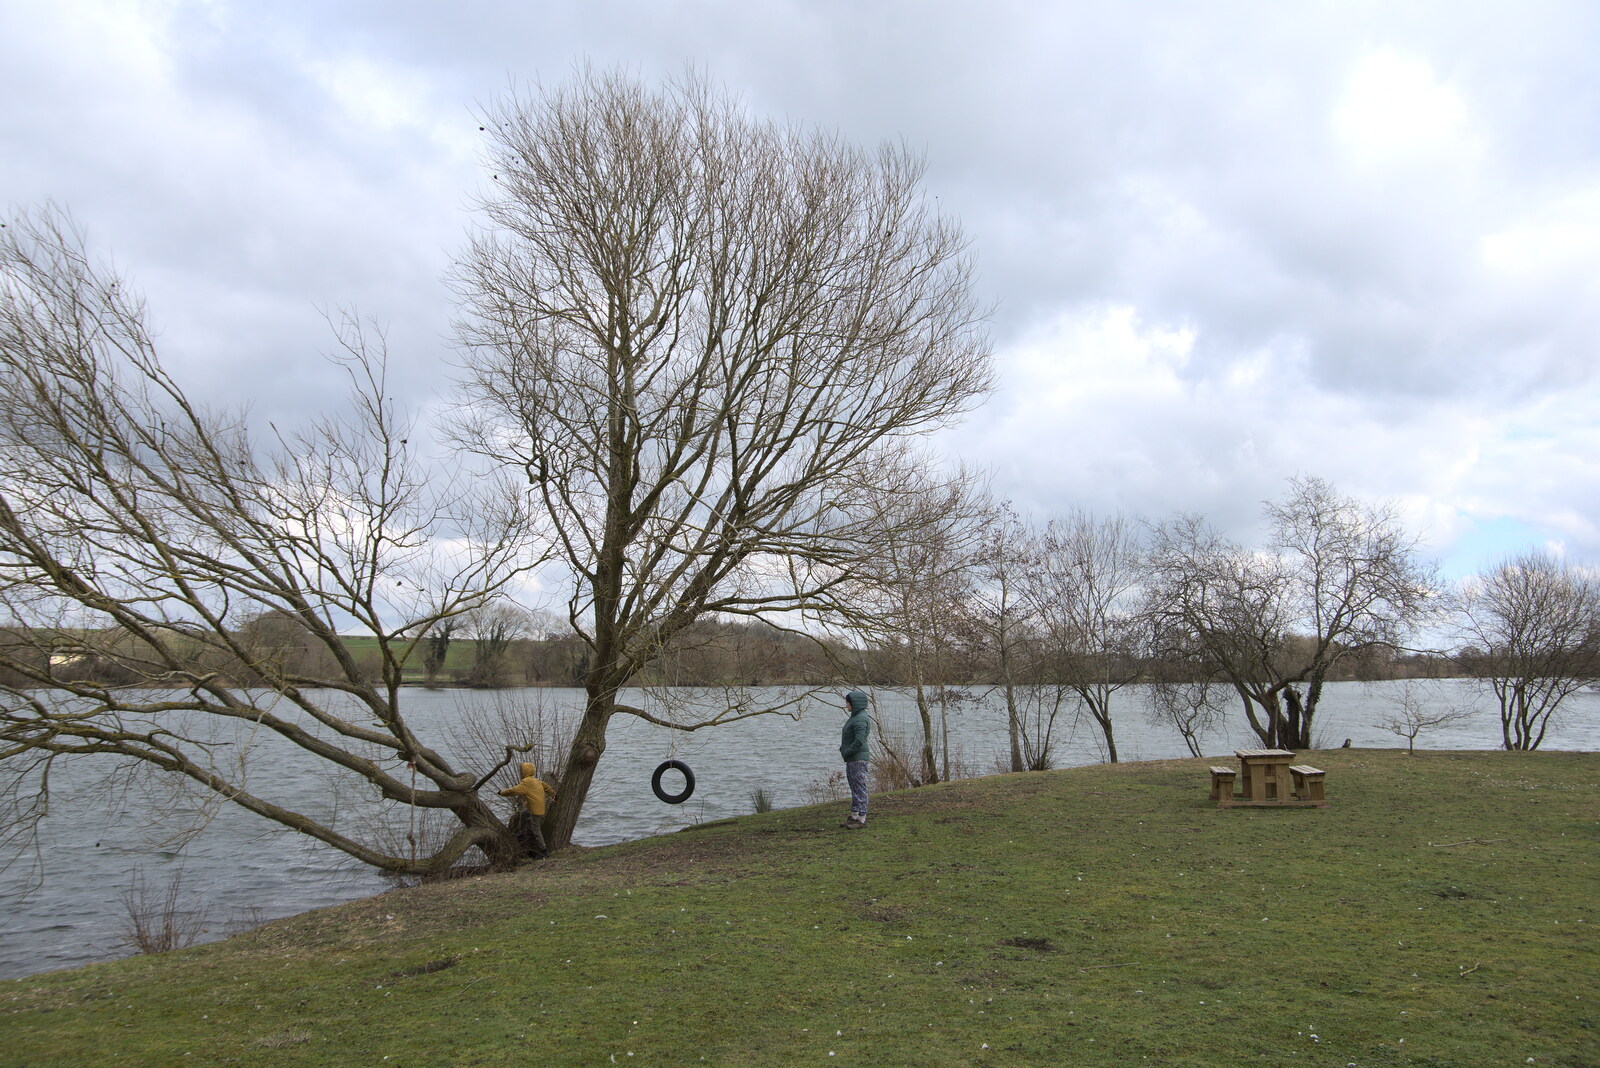 The boys by the lake from Weybread Pits and a Sunday Walk, Brome, Suffolk - 6th March 2022